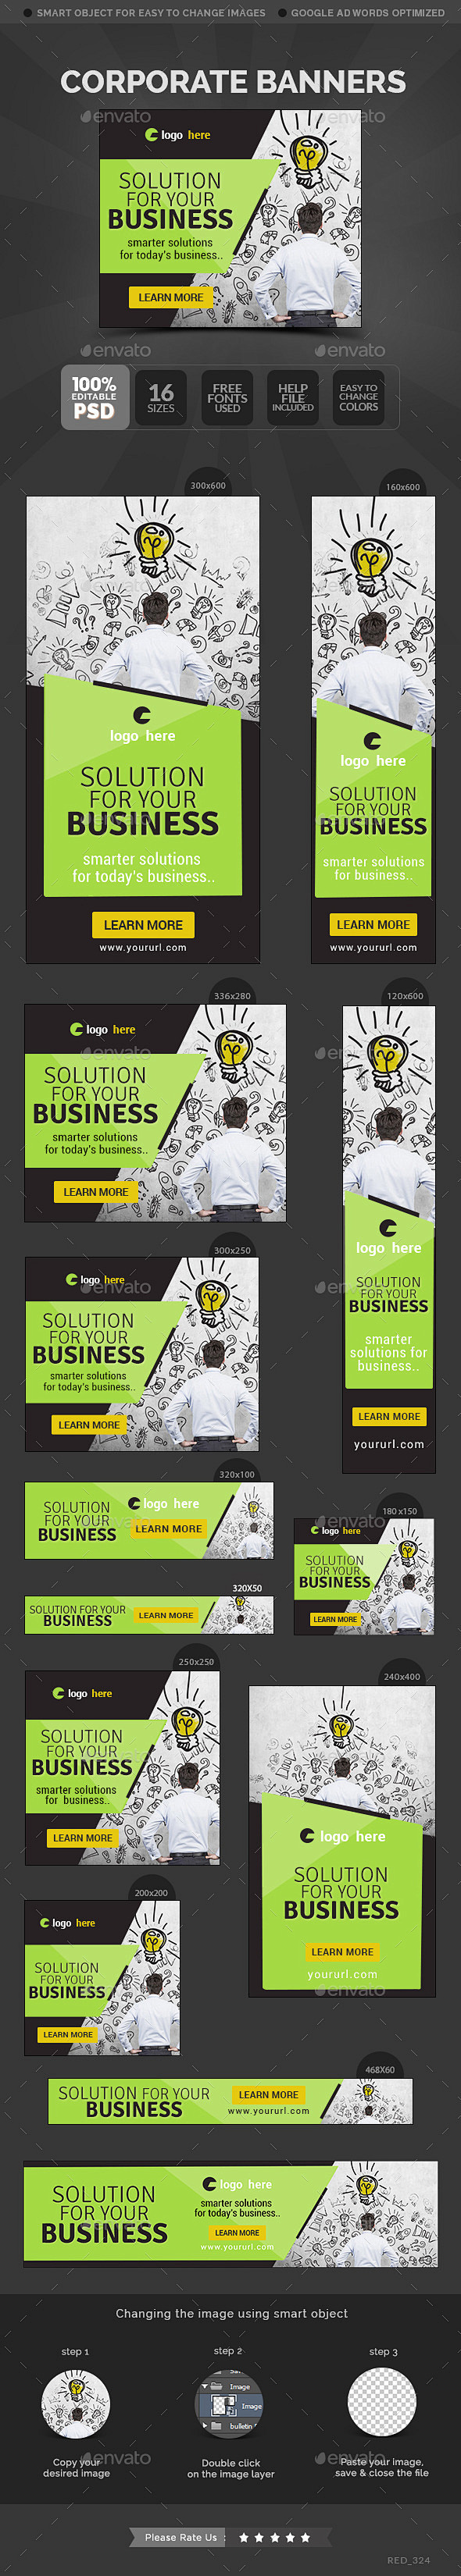 Corporate Banners - ...